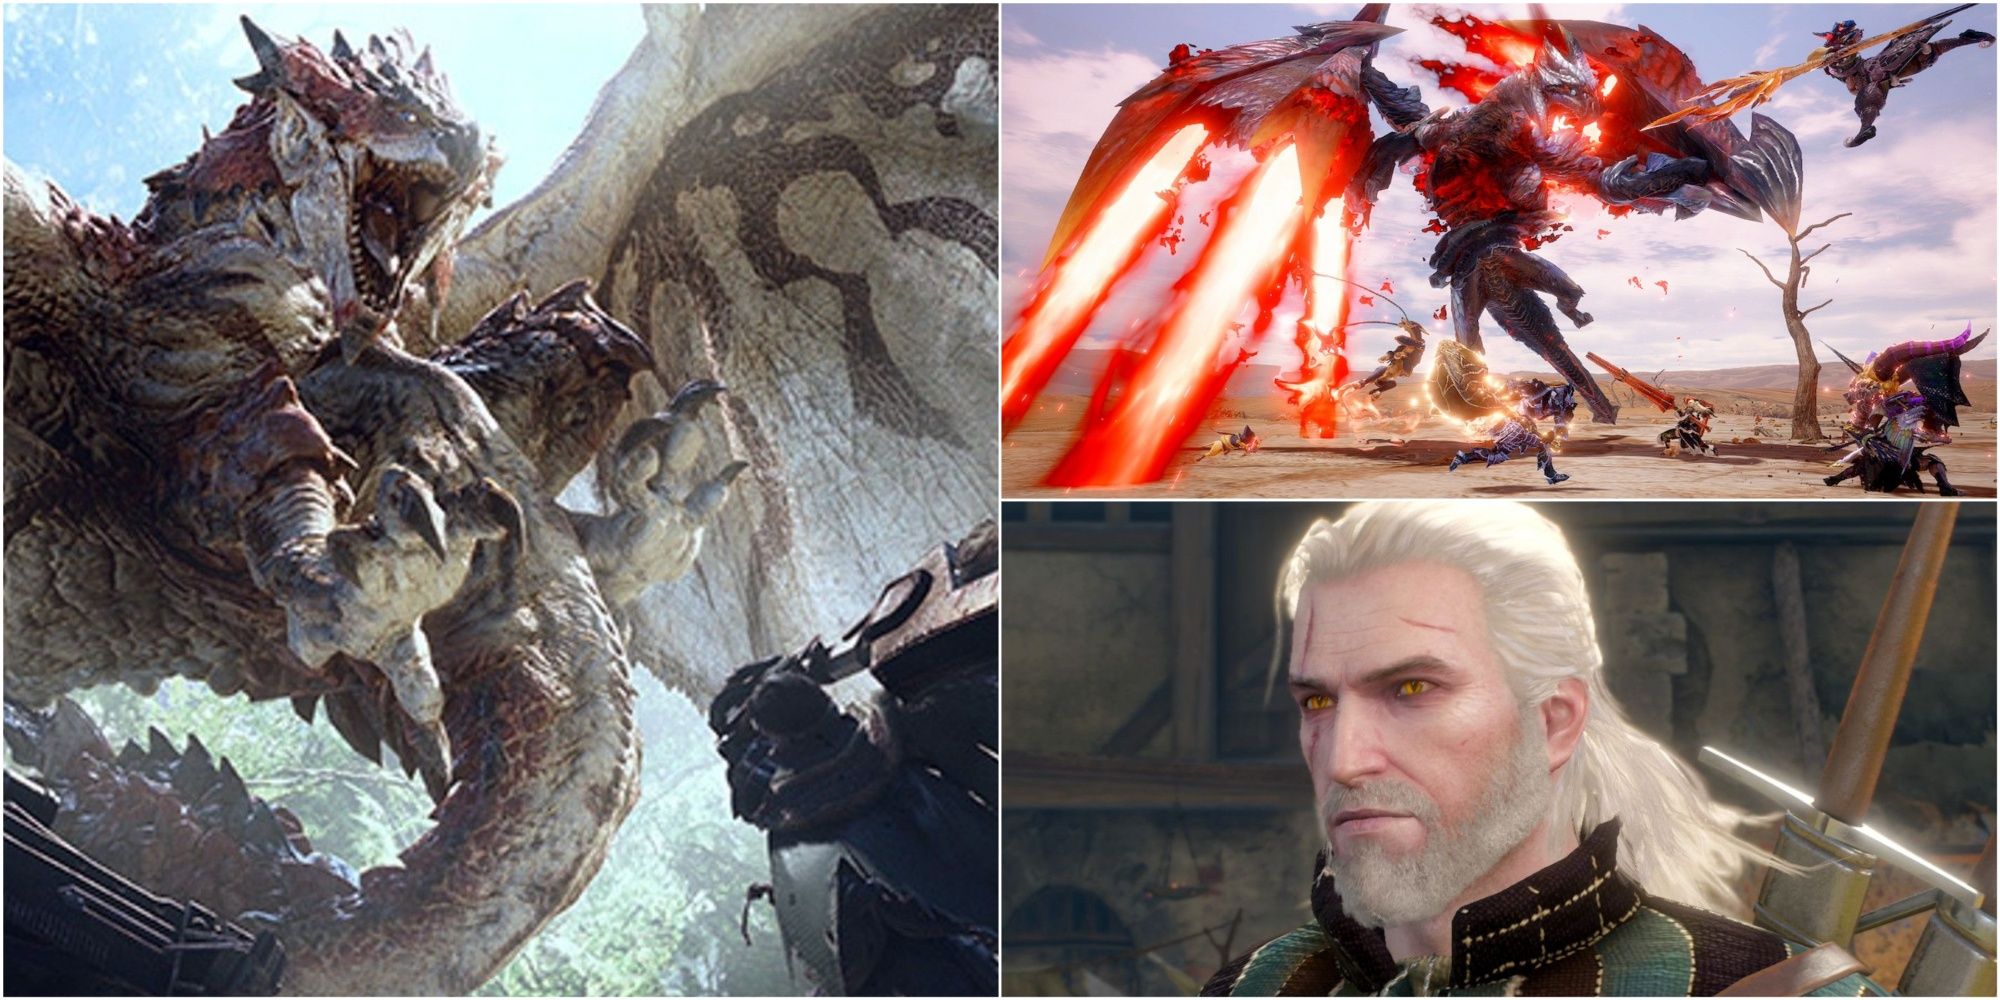 Best Games About Monster Slaying